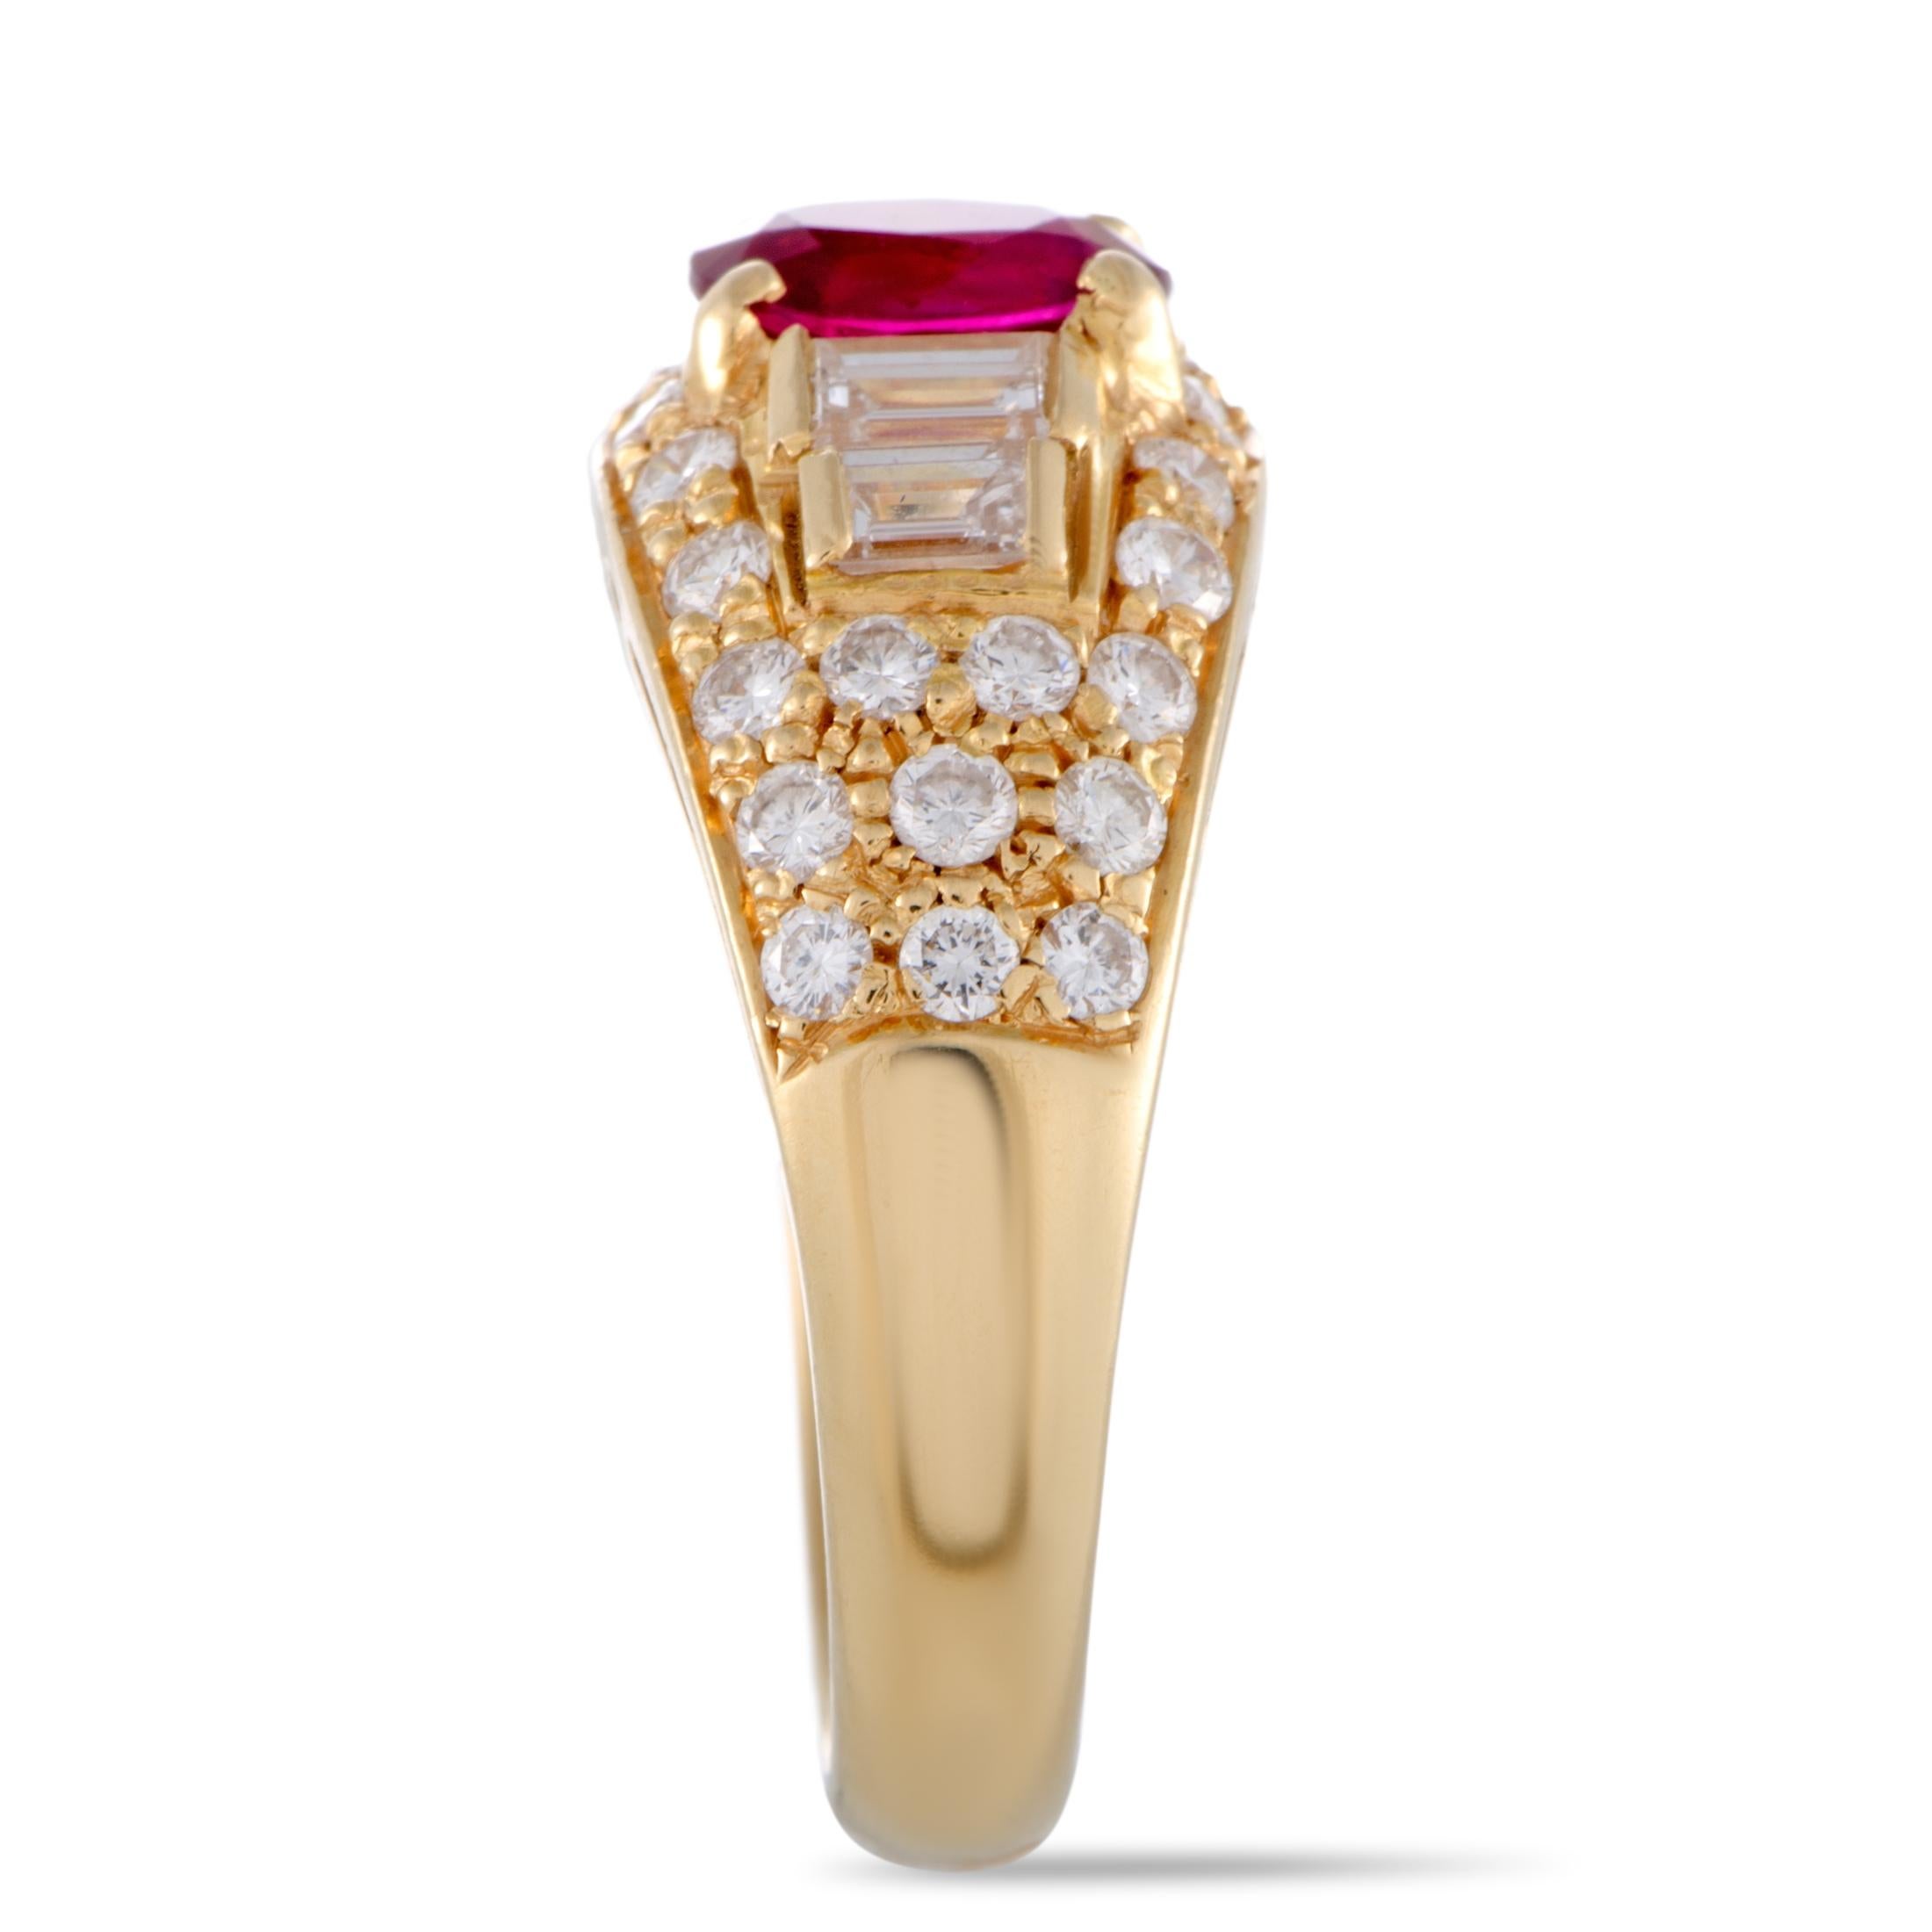 Set amidst a plethora of resplendent diamonds and against the luxurious sheen of 18K yellow gold, the stunning ruby gives a compellingly regal appeal to this marvelous Bvlgari ring. The diamonds amount to approximately 1.25 carats, while the ruby